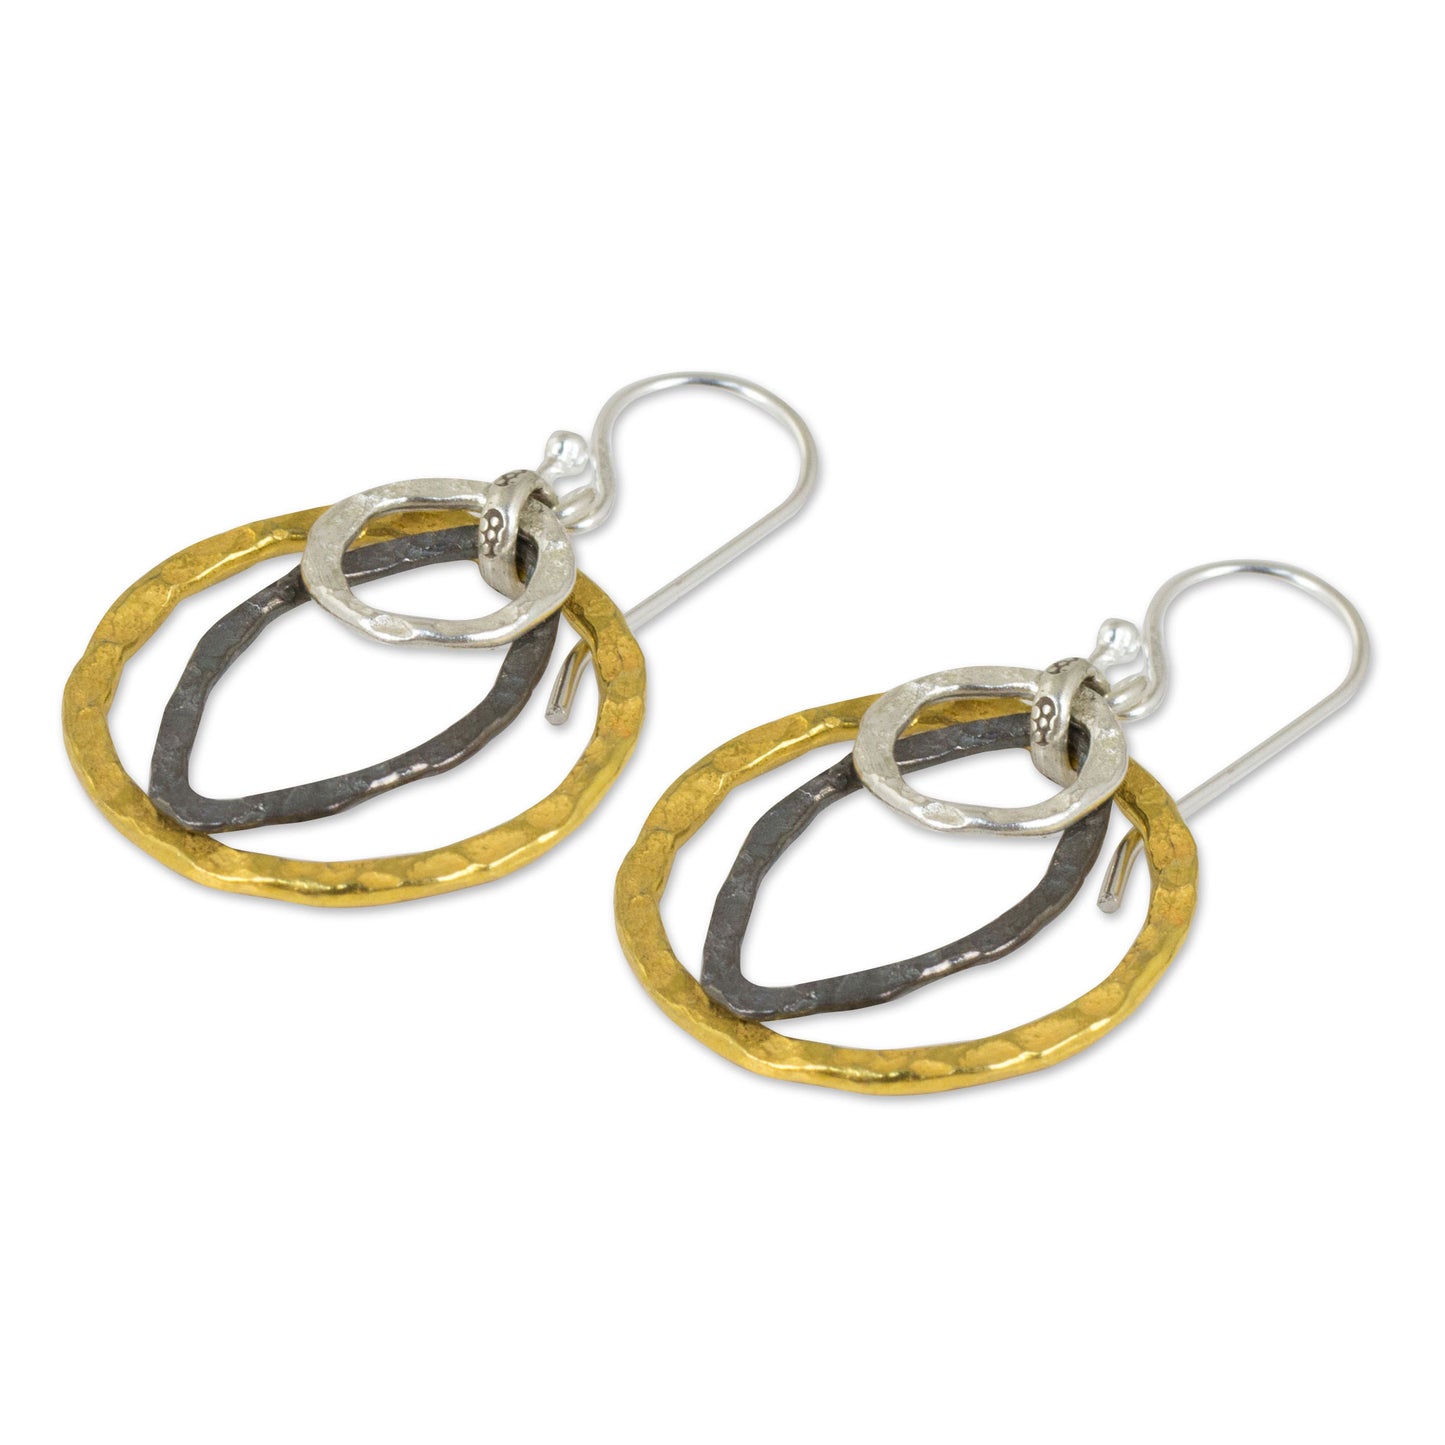 Equilibrium Artisan Crafted Earrings with Sterling Silver and Gold Plate